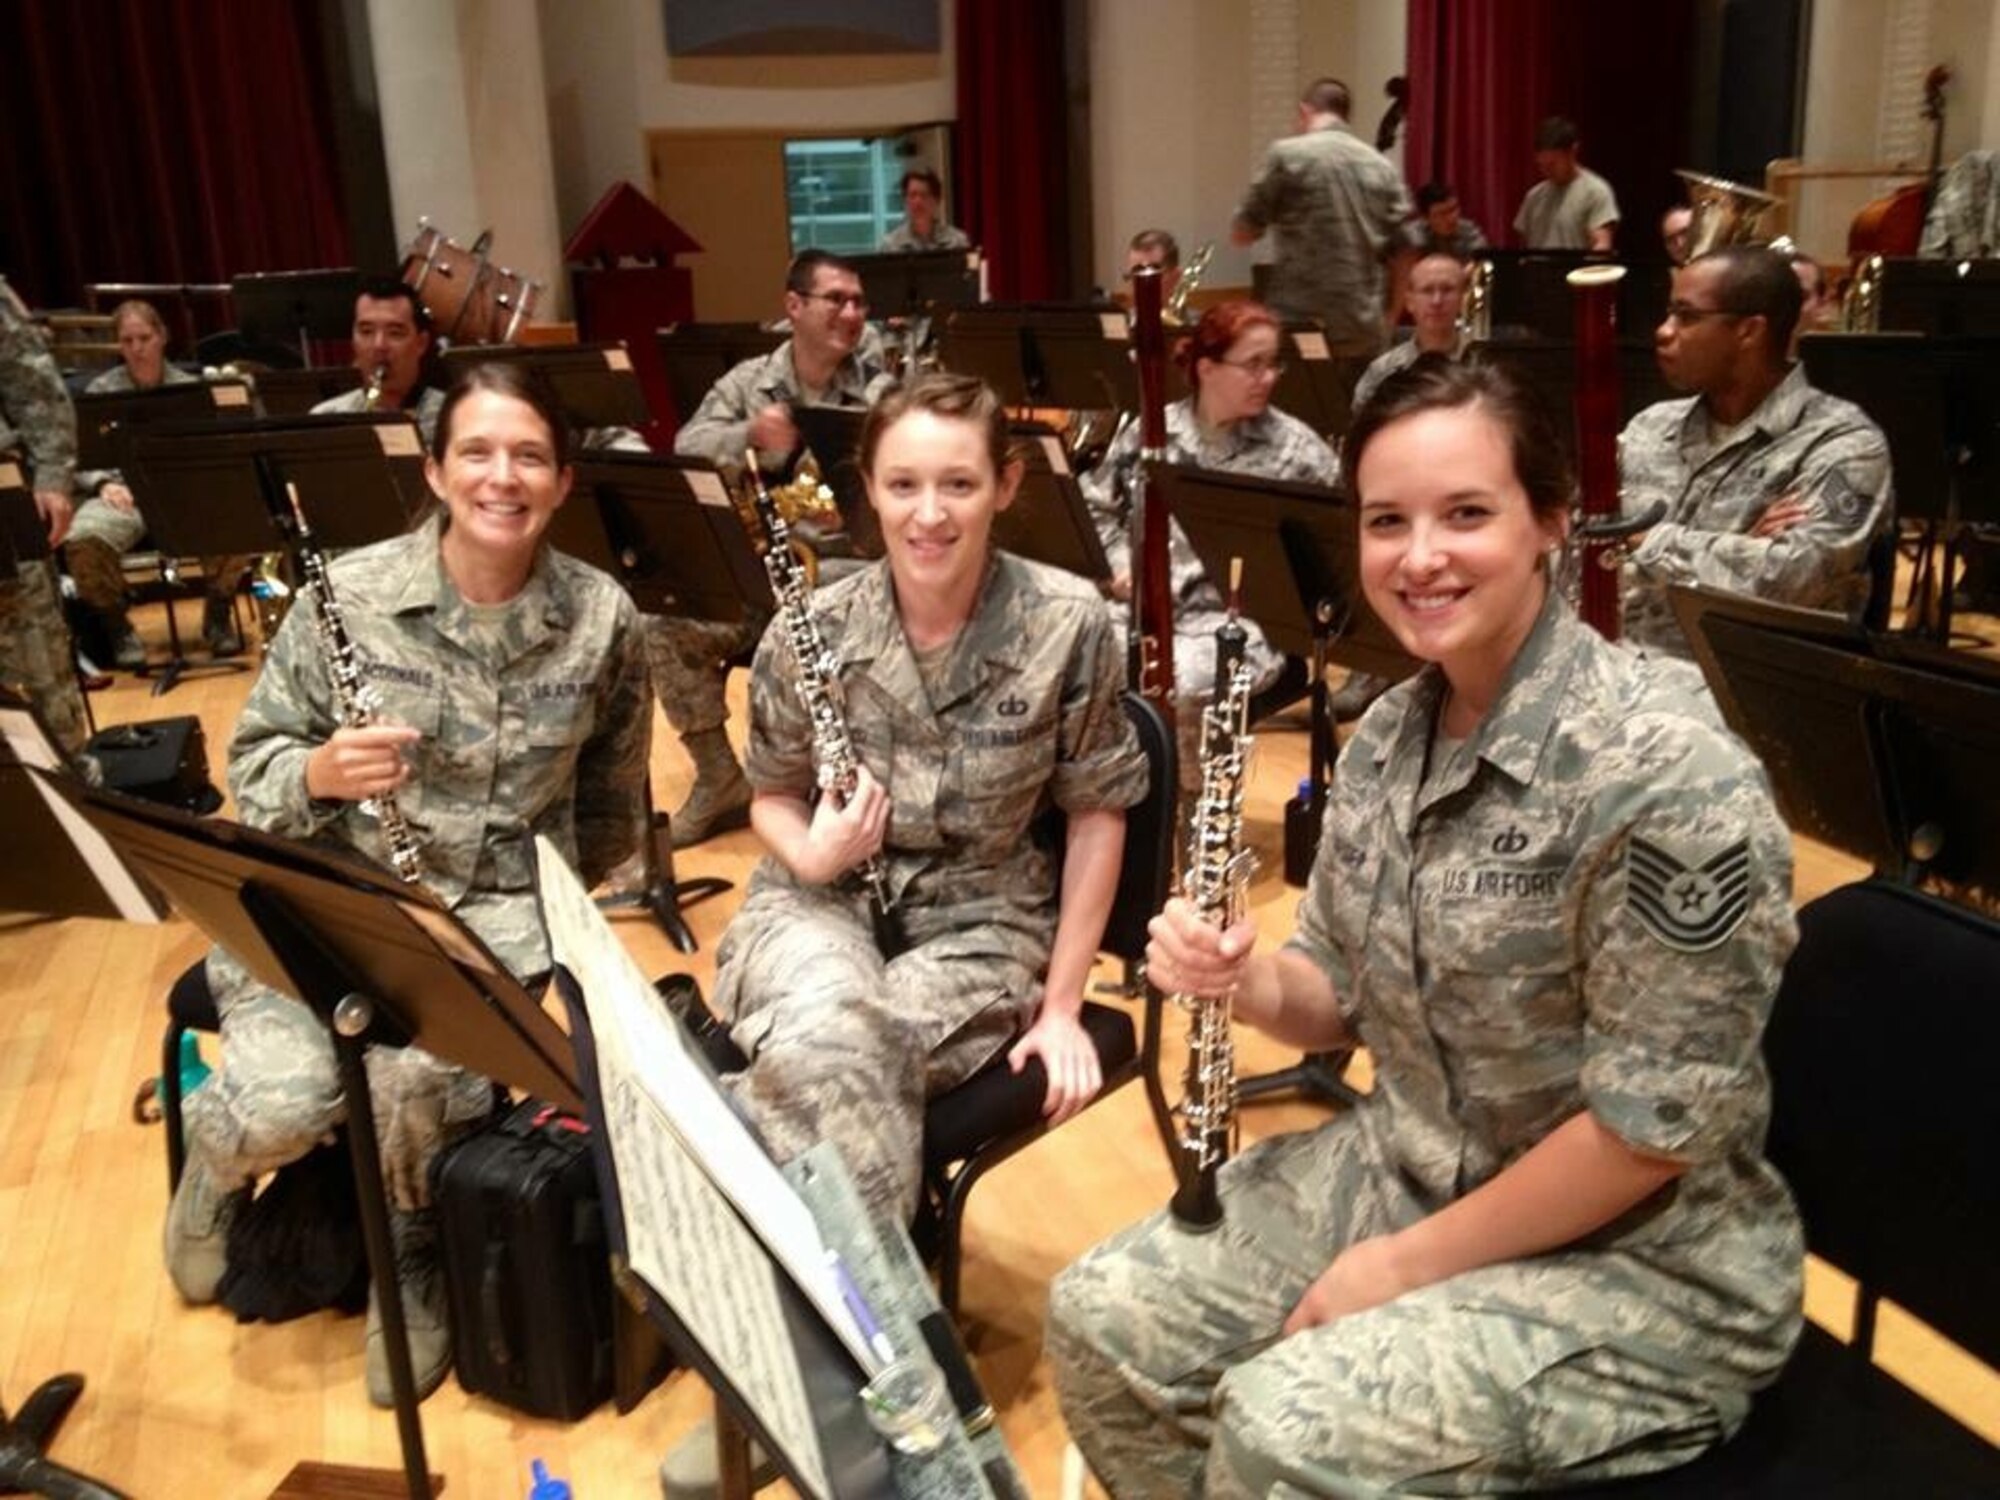 (From left) Master Sgt. Tracey MacDonald and Technical Sgts Kaitlin Taylor and Emily Snyder pose during a break from a Concert Band rehearsal (photo by Master Sgt. Juliana Arnold/released).
